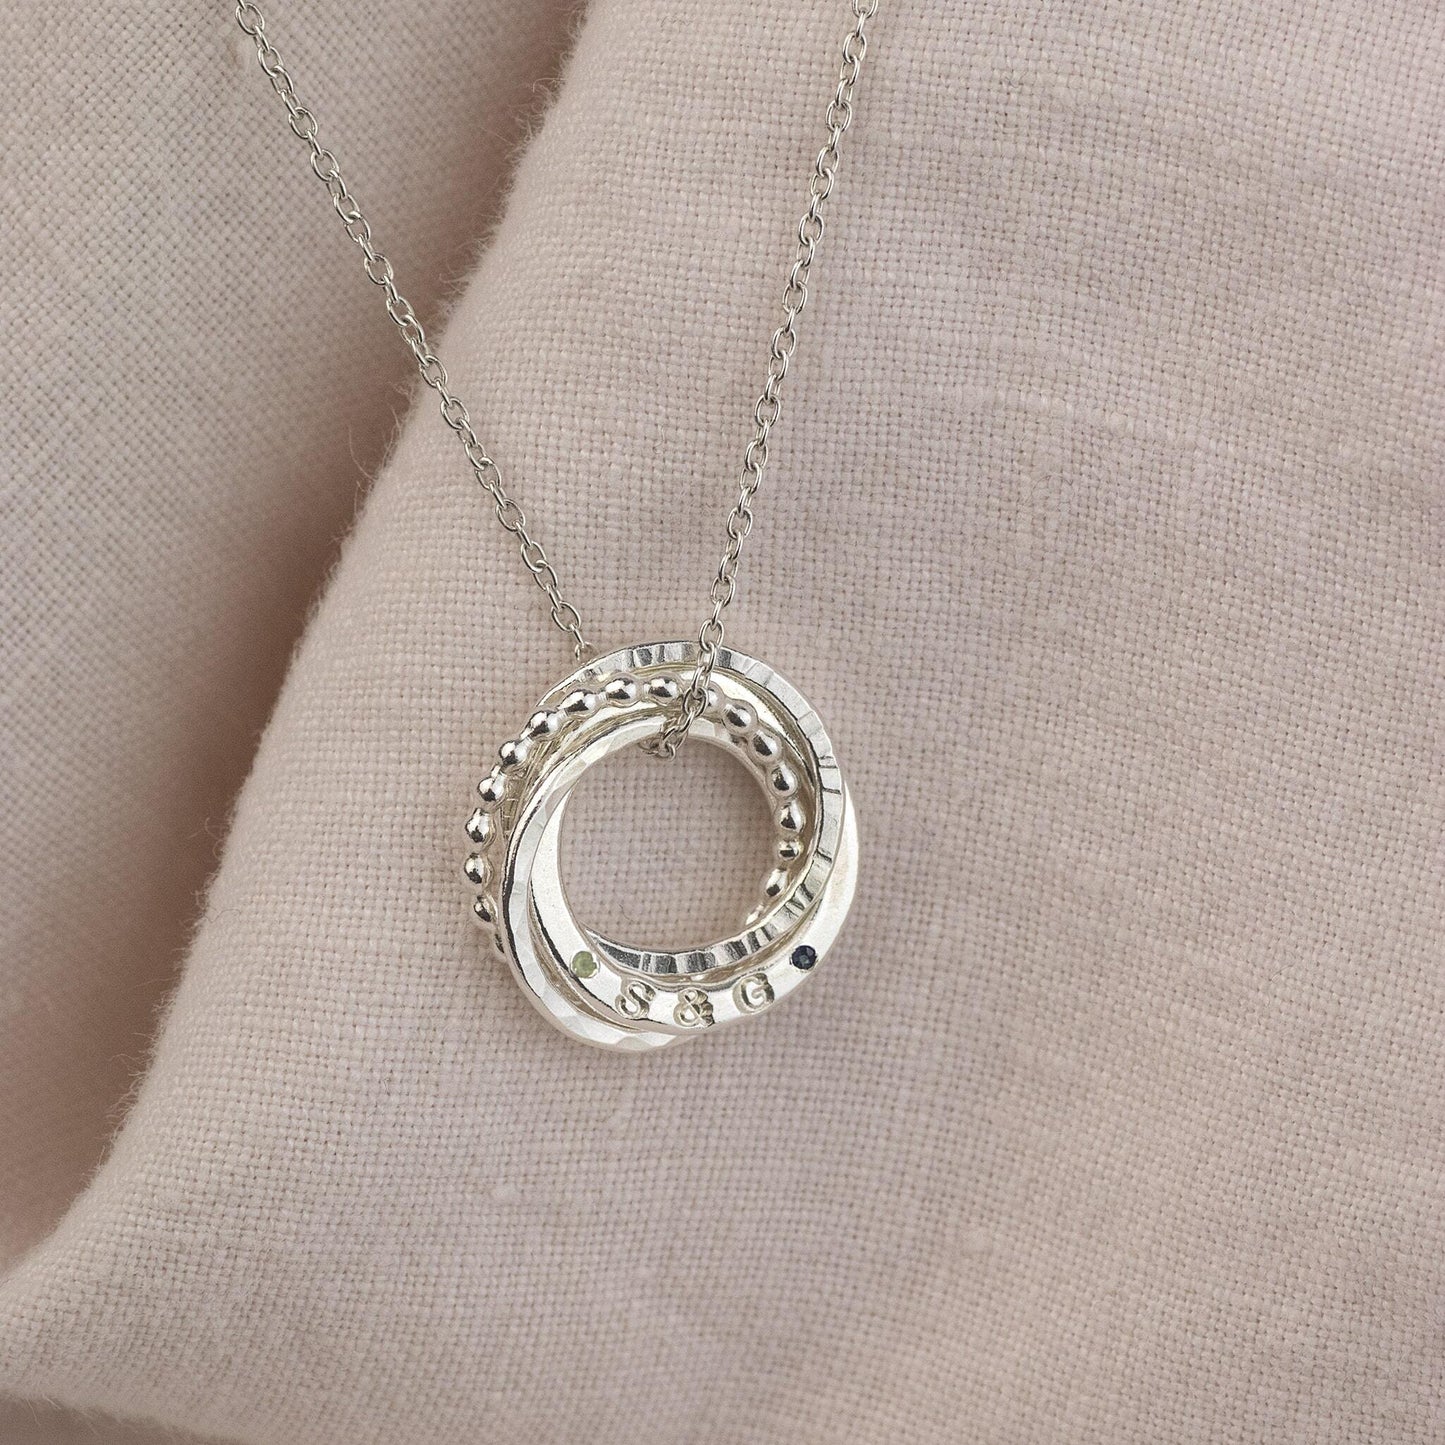 Personalised 4th Anniversary Birthstone Necklace - The Original 4 Rings for 4 Years Necklace - Petite Silver